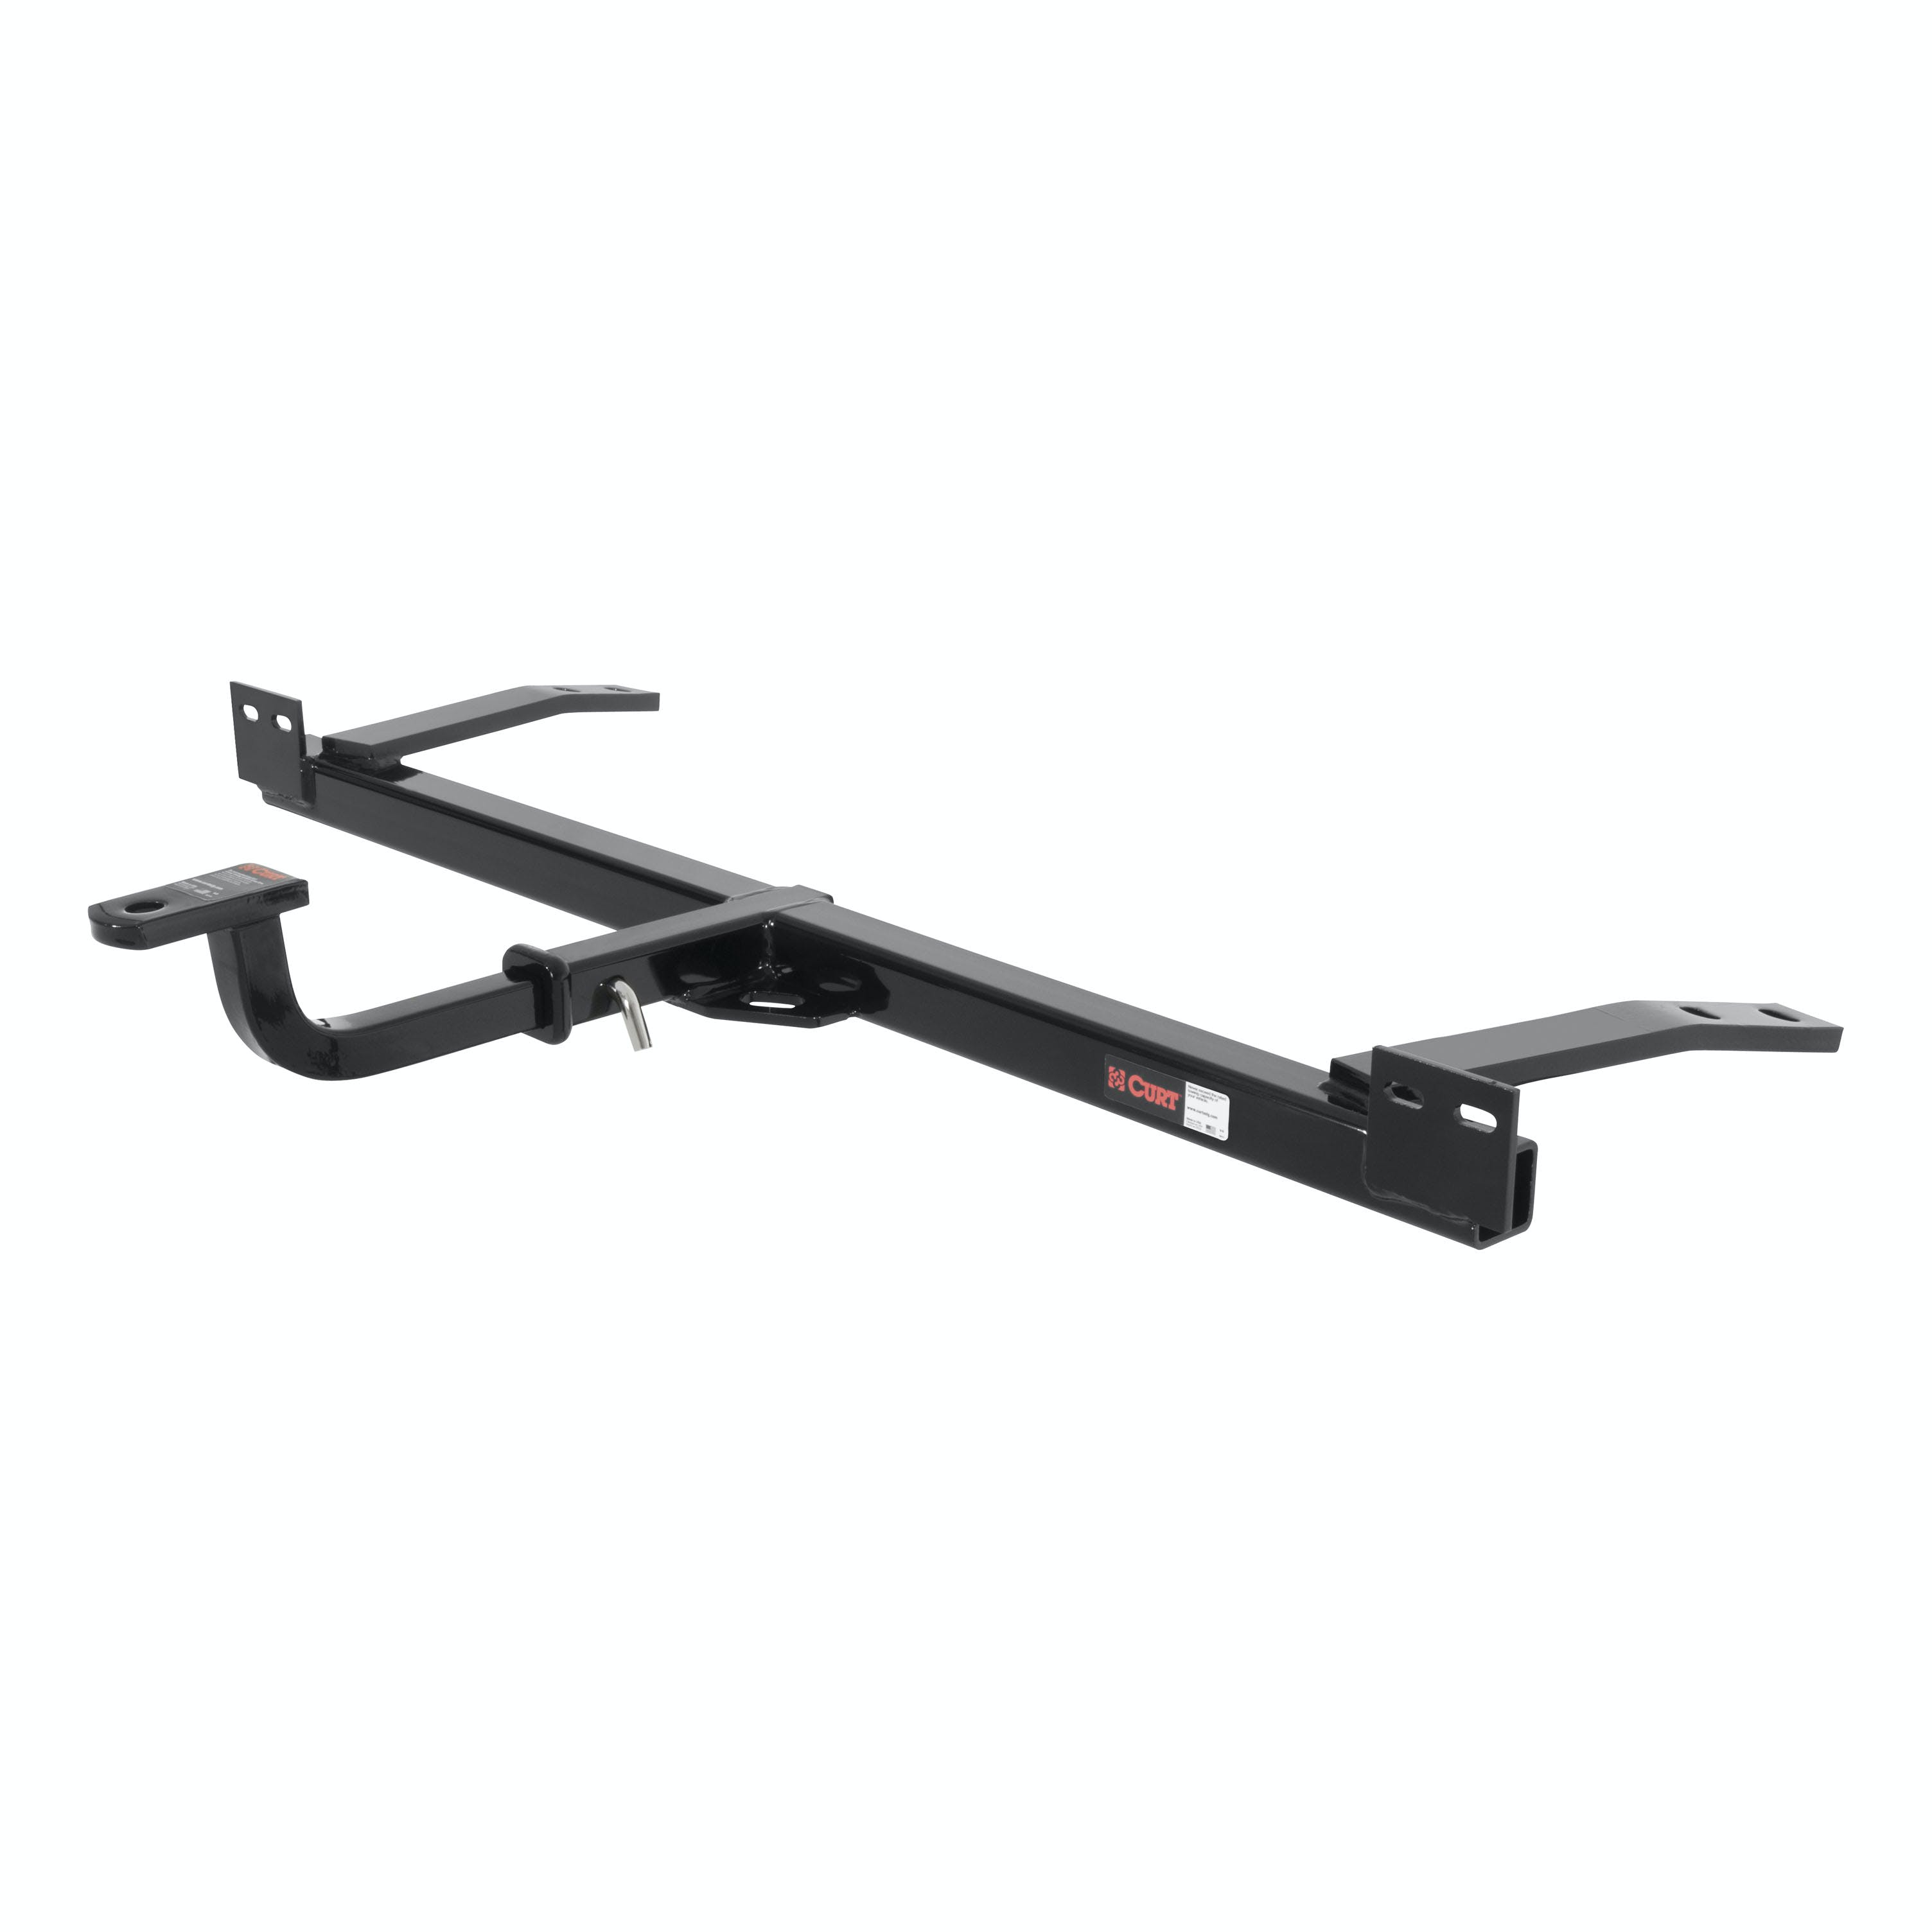 CURT 120093 Class 2 Hitch, 1-1/4 Mount, Select Buick, Chevy, Oldsmobile, Pontiac (Exposed)